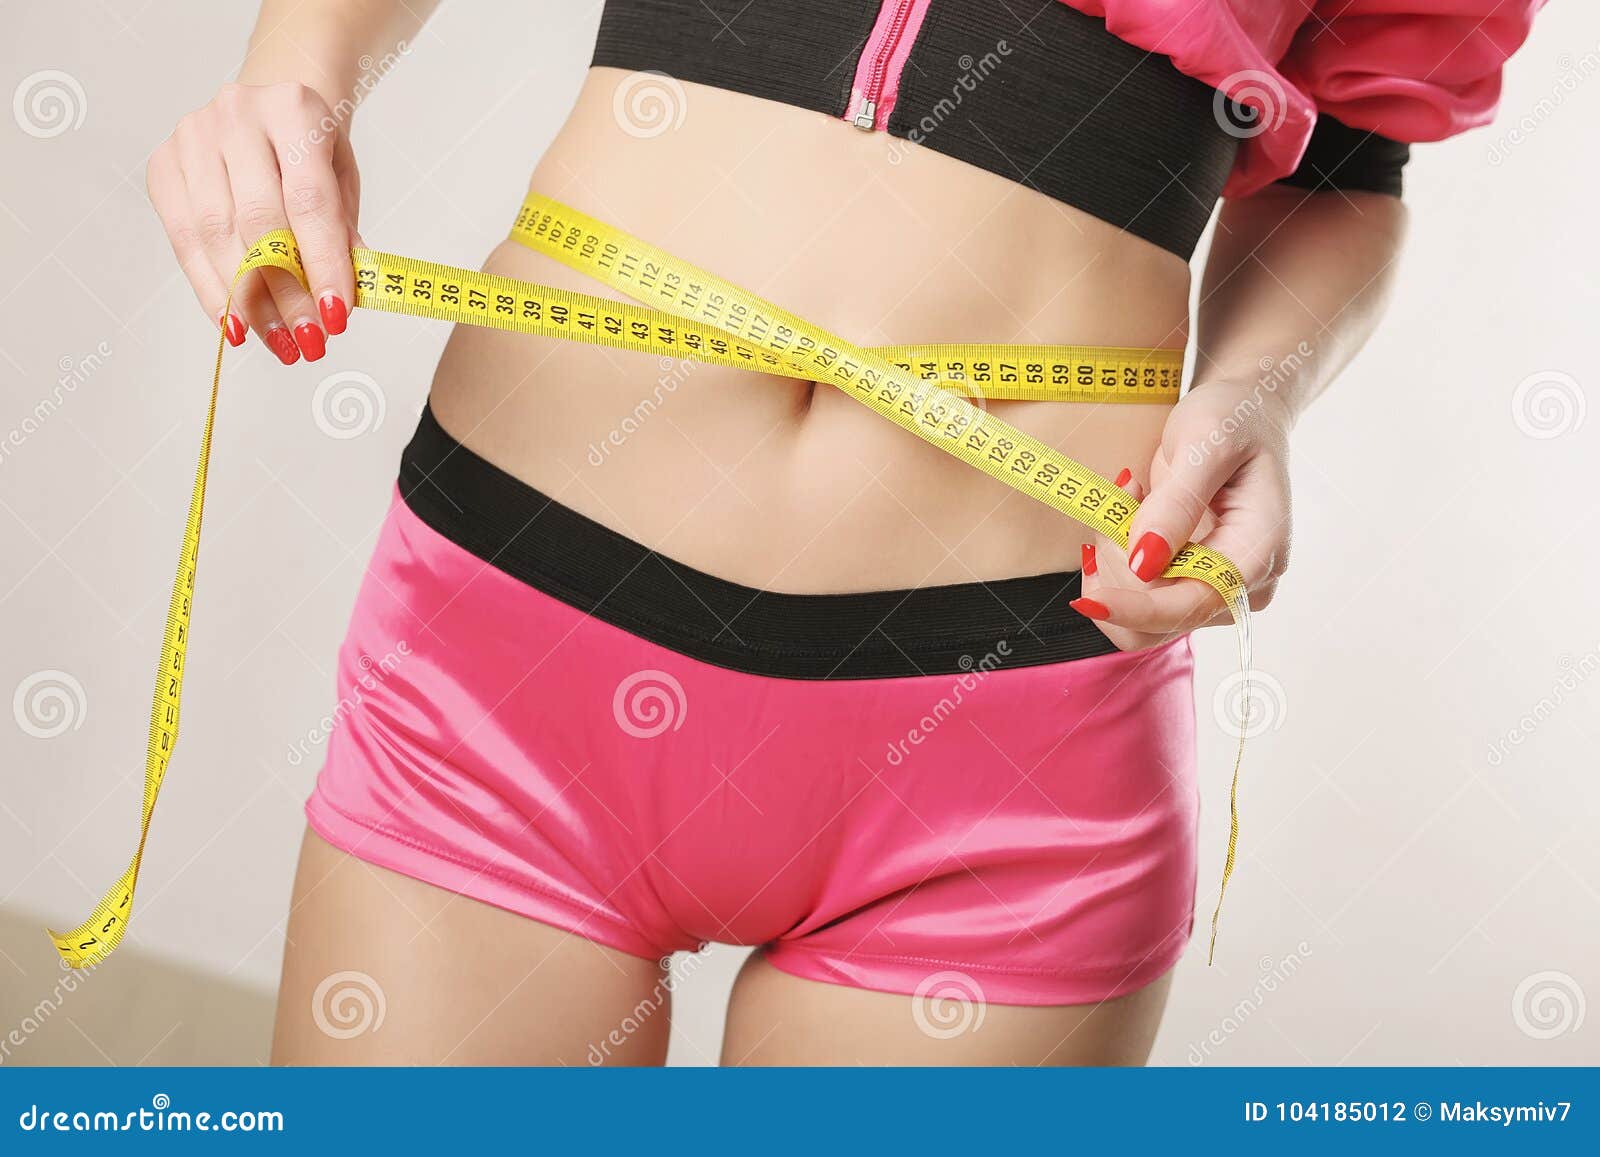 Photo of Young slim woman measuring her waist with a tape